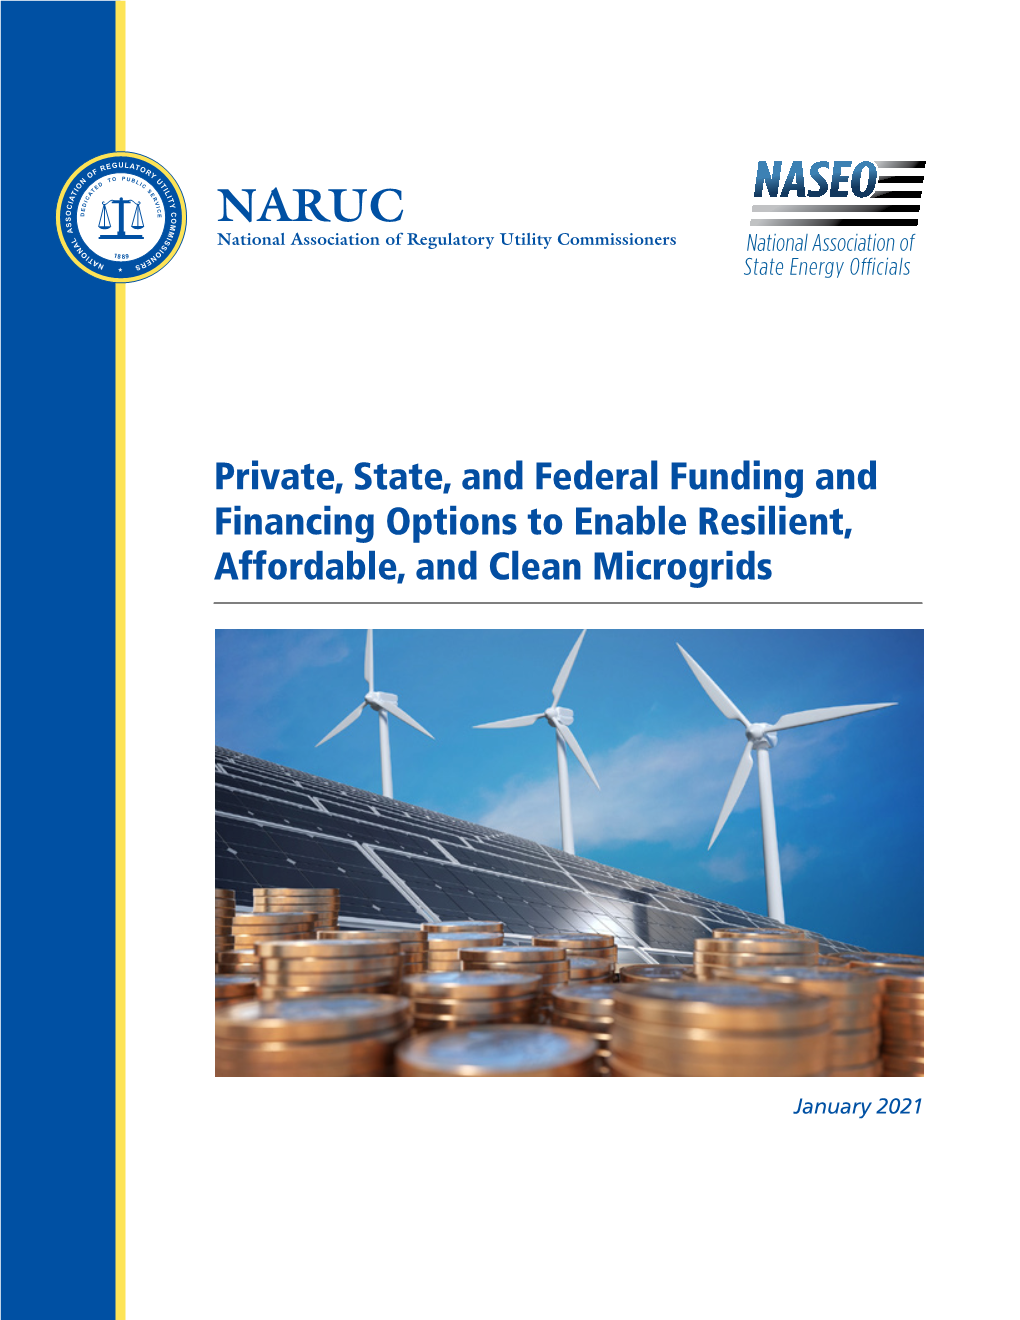 Private, State, and Federal Funding and Financing Options to Enable Resilient, Affordable, and Clean Microgrids